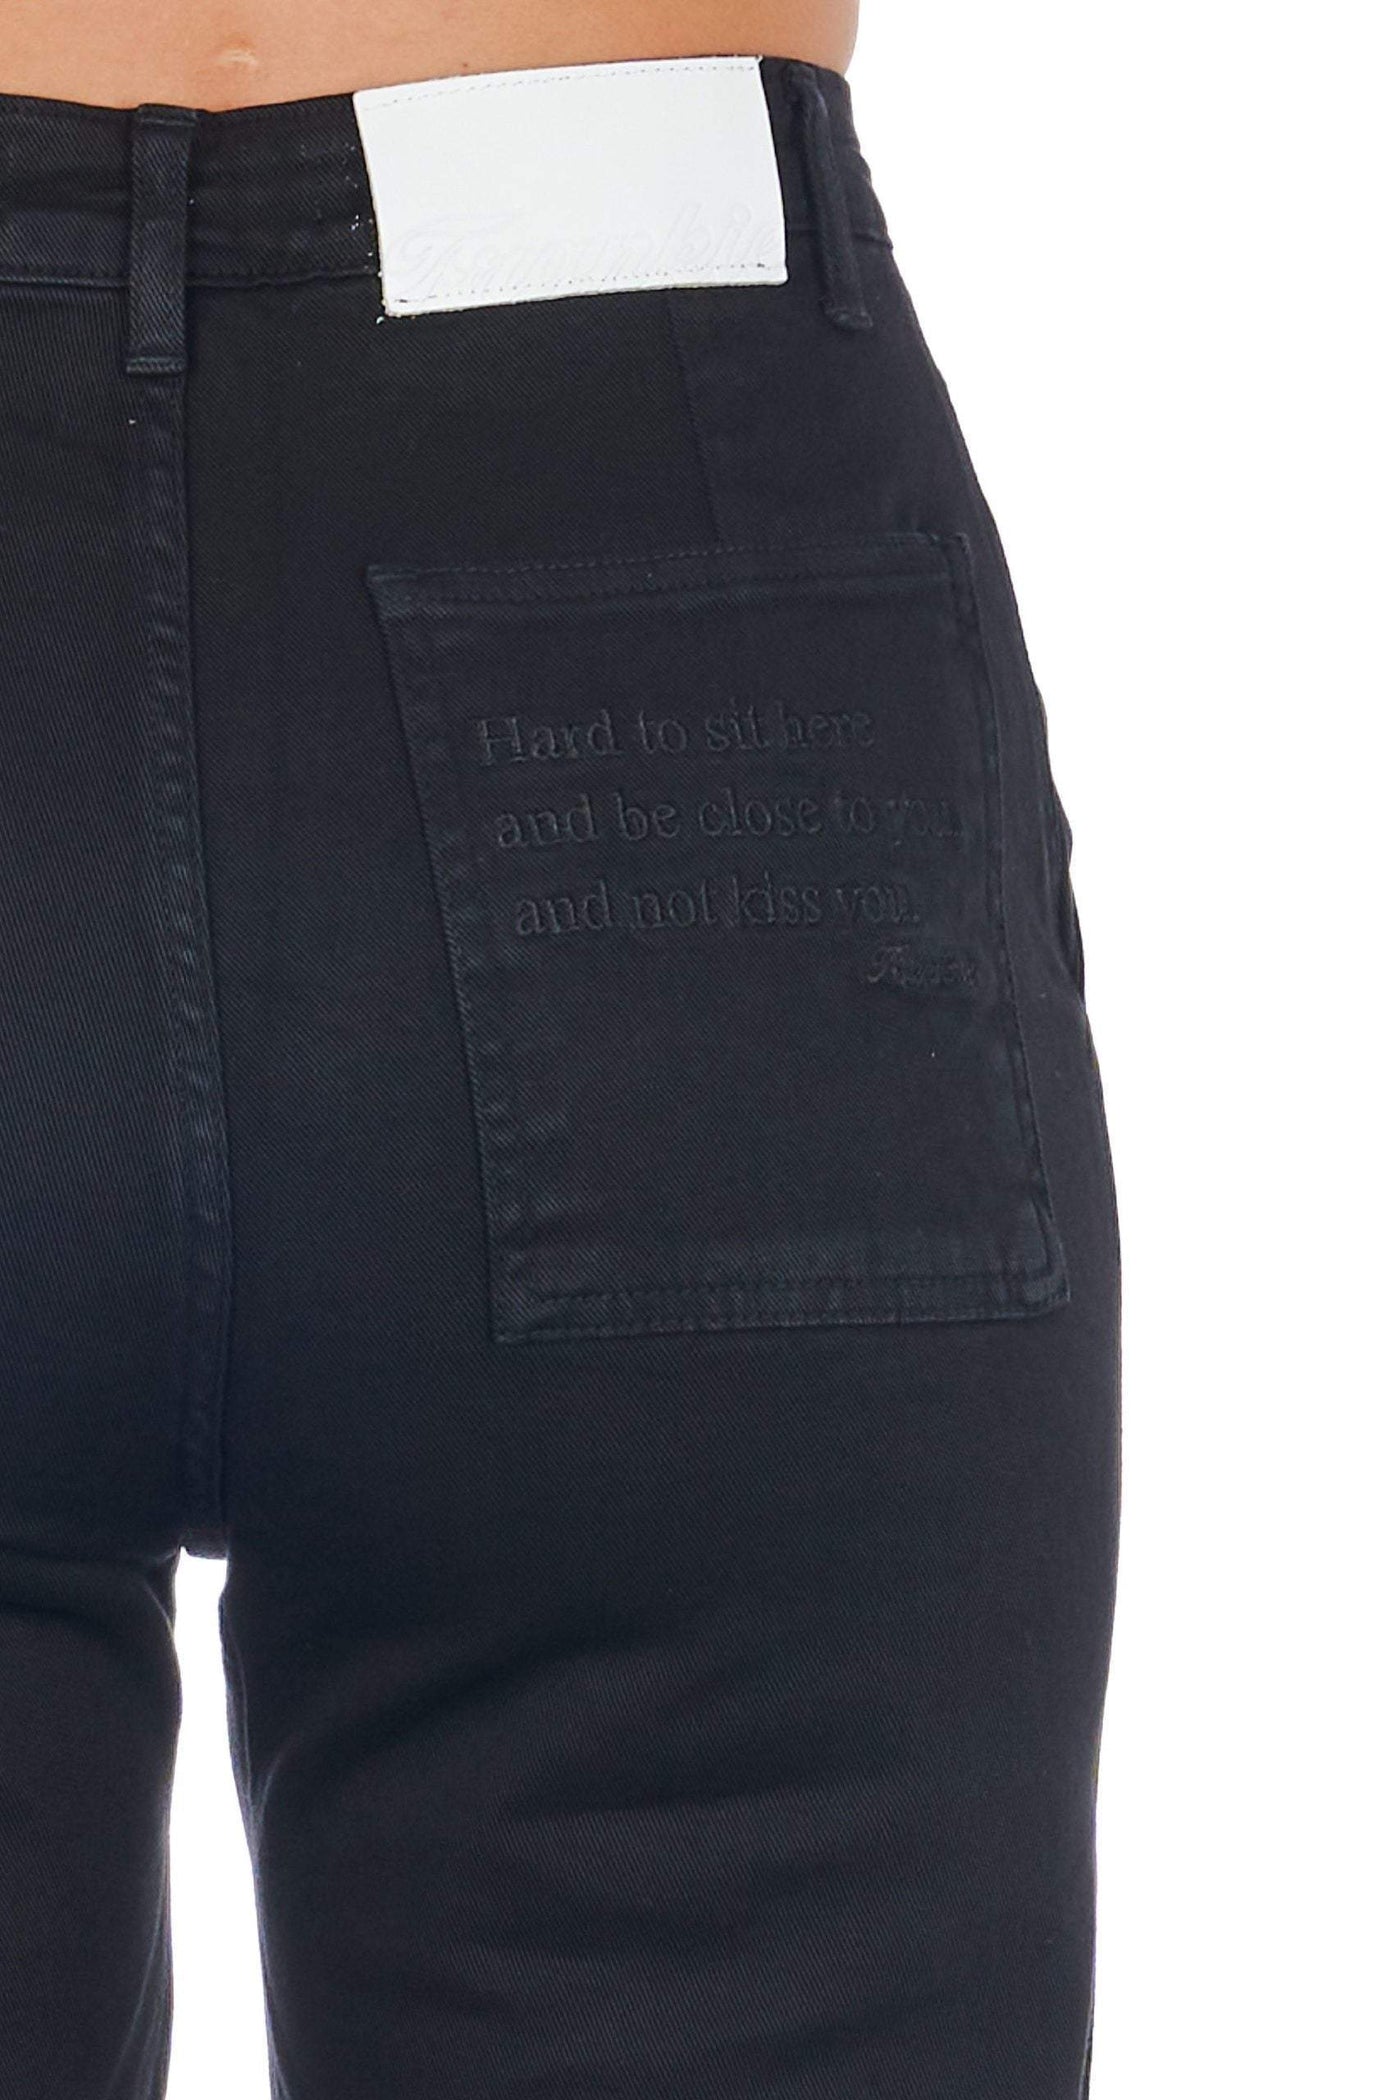 Frankie Morello high waisted multipockets Jeans & Pant #women, Black, feed-agegroup-adult, feed-color-Black, feed-gender-female, Frankie Morello, IT40 | XS, IT42 | S, IT44 | M, Jeans & Pants - Women - Clothing at SEYMAYKA